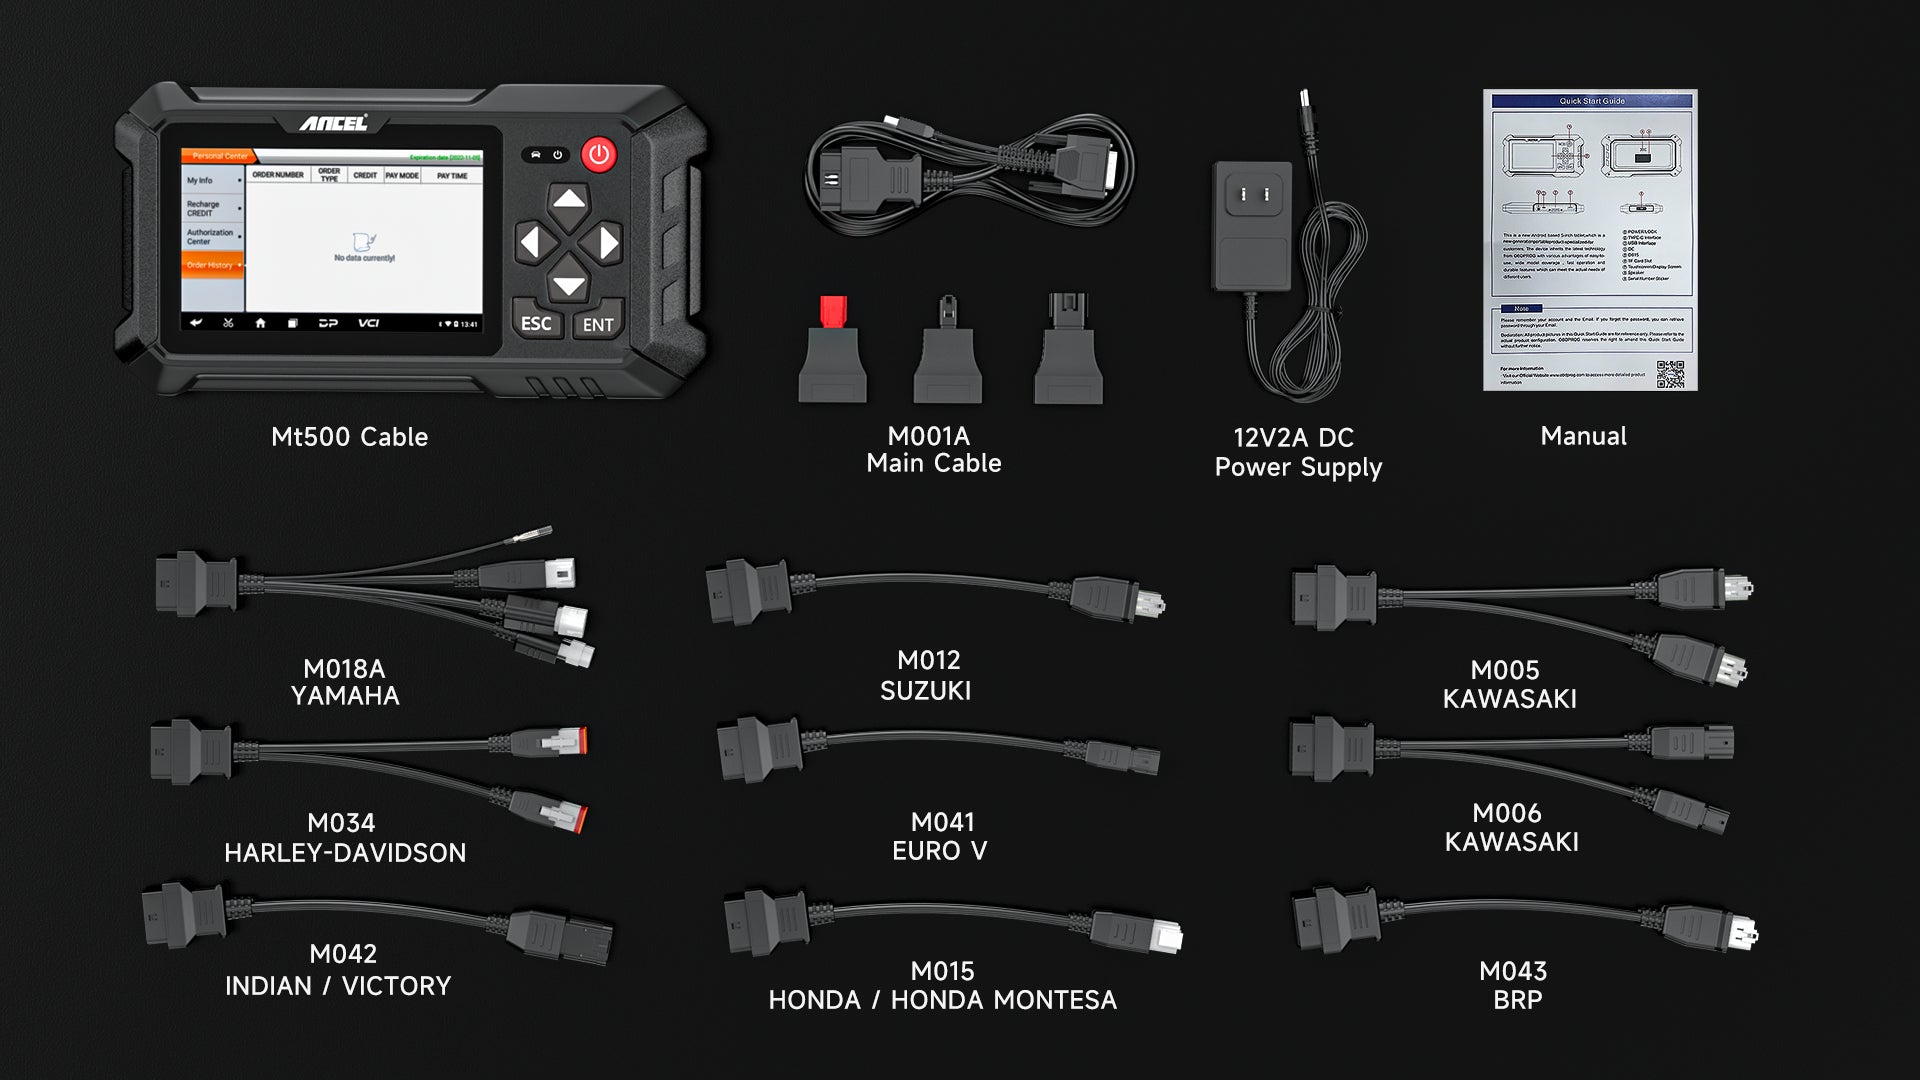 ancel MT500 is the best diagnostic tool for motorcycles